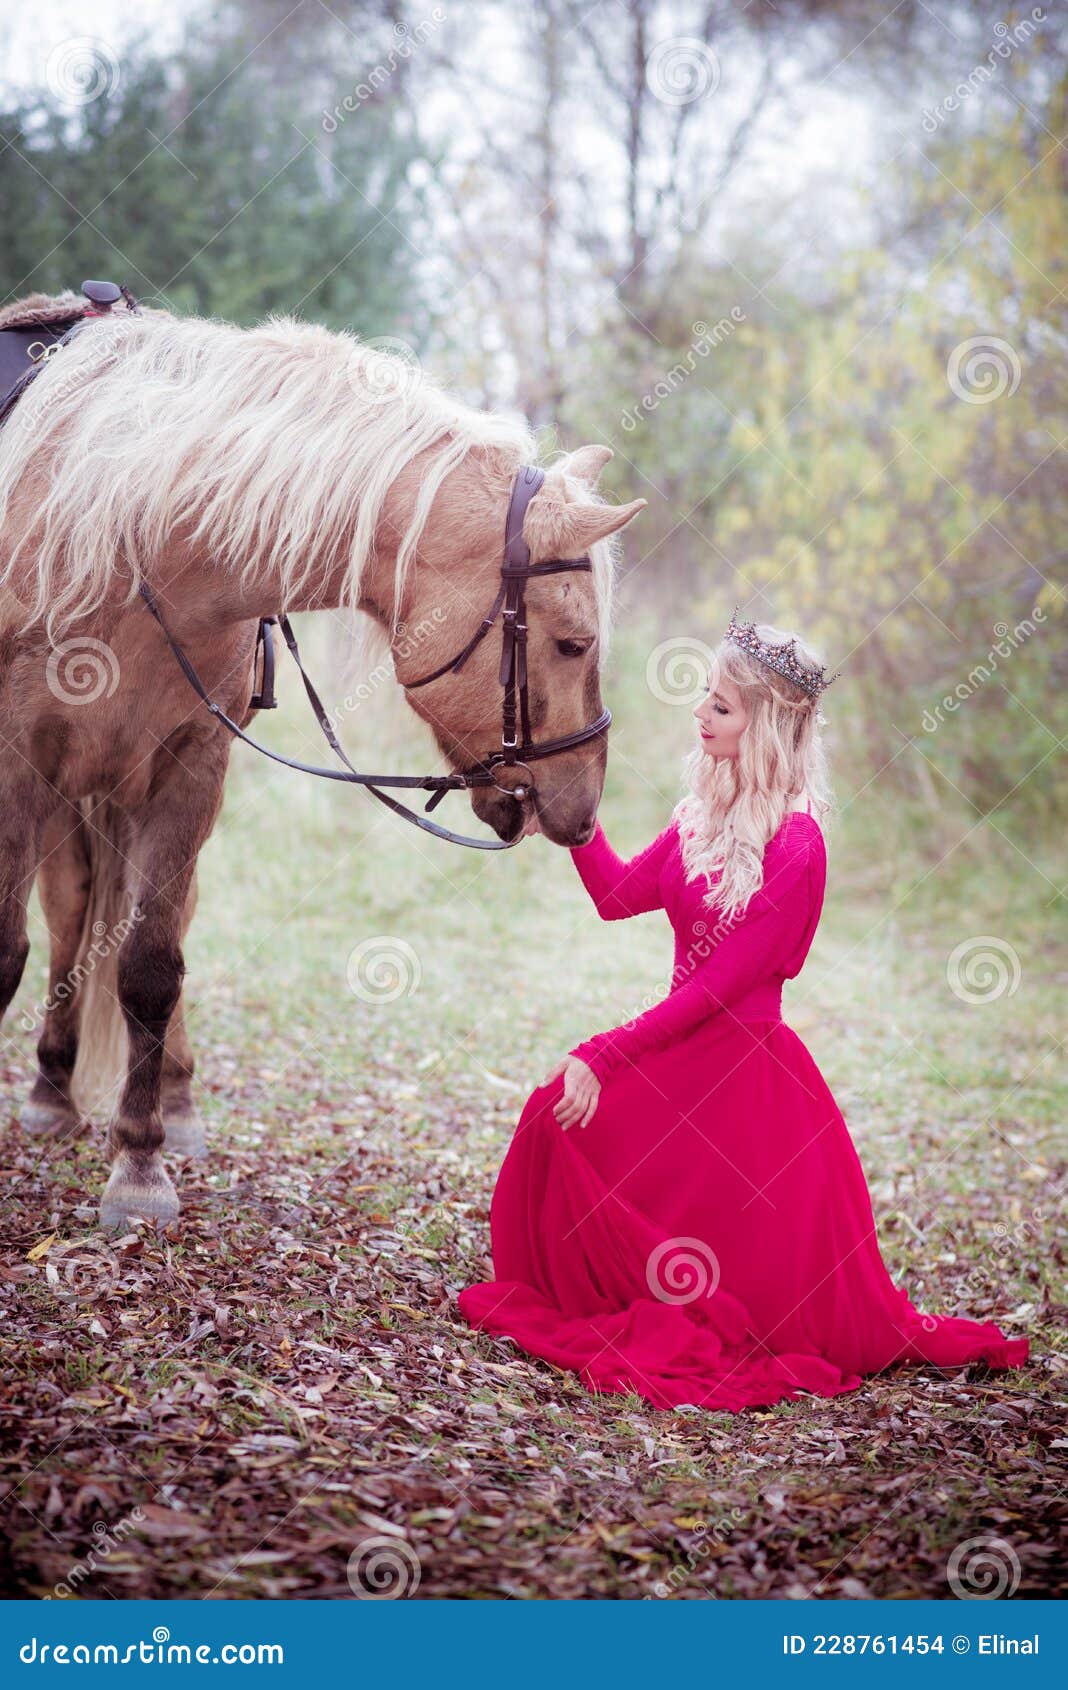 Girl, Princess Sitting with Horse, Fantasy. Fairy Tale Stock Photo ...